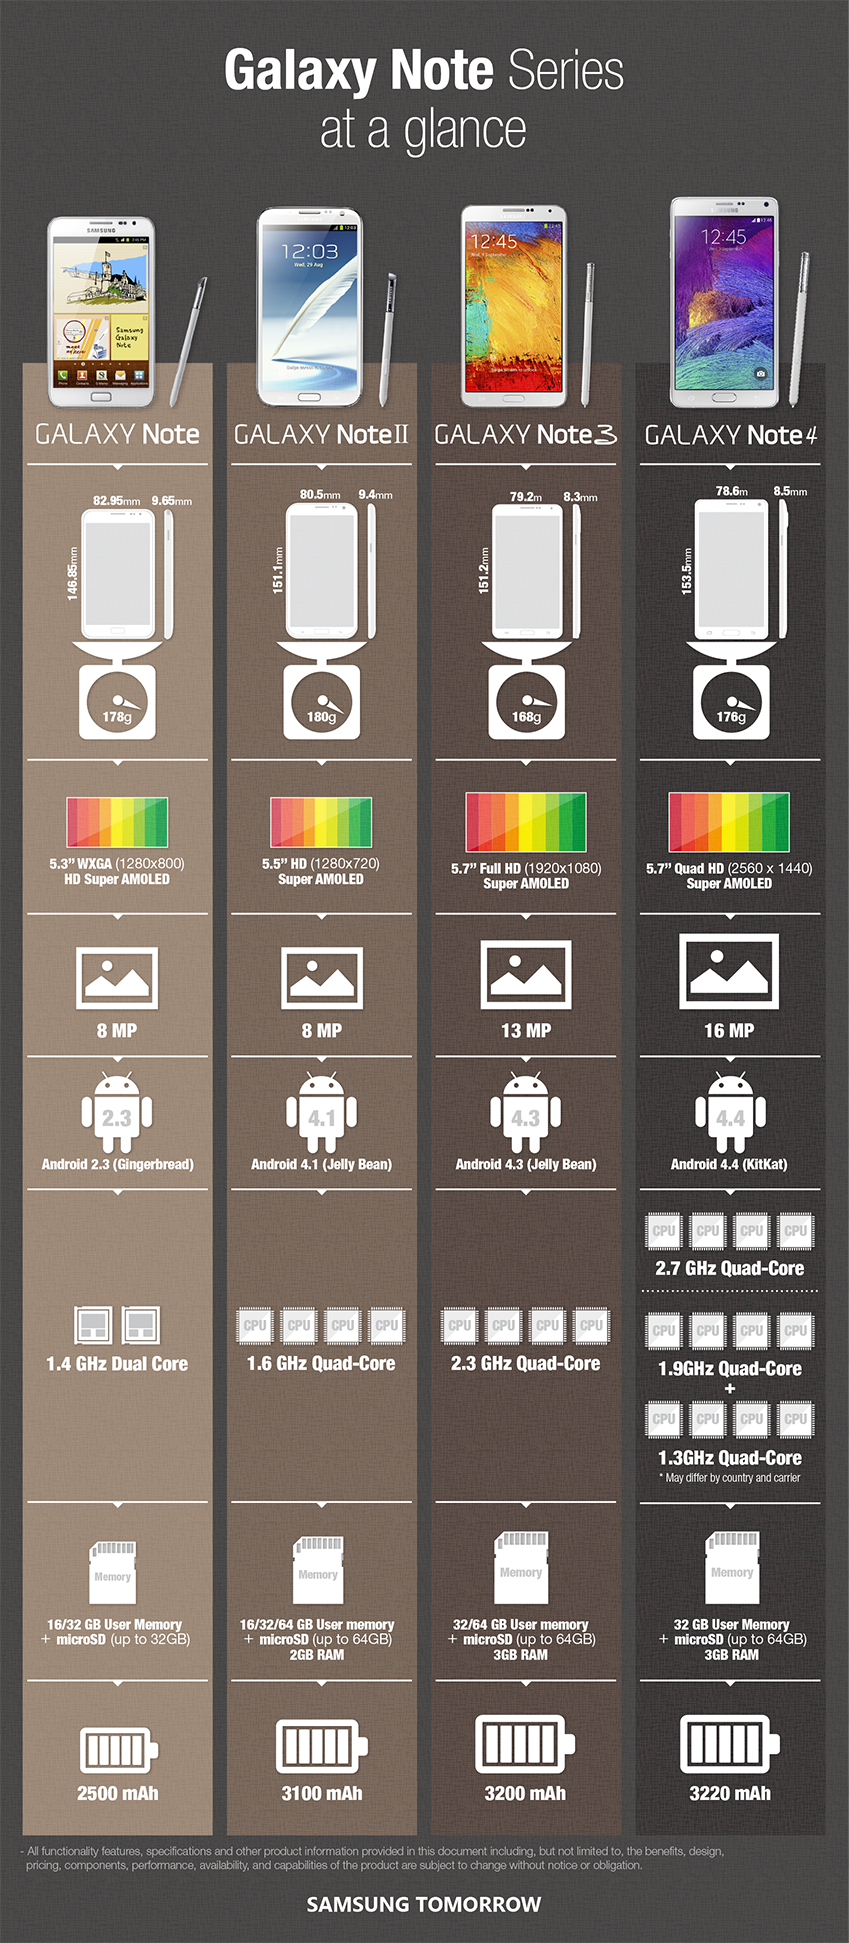 Samsung infographic compares the Galaxy Note 4 to the Note 3, Note II, and original Note